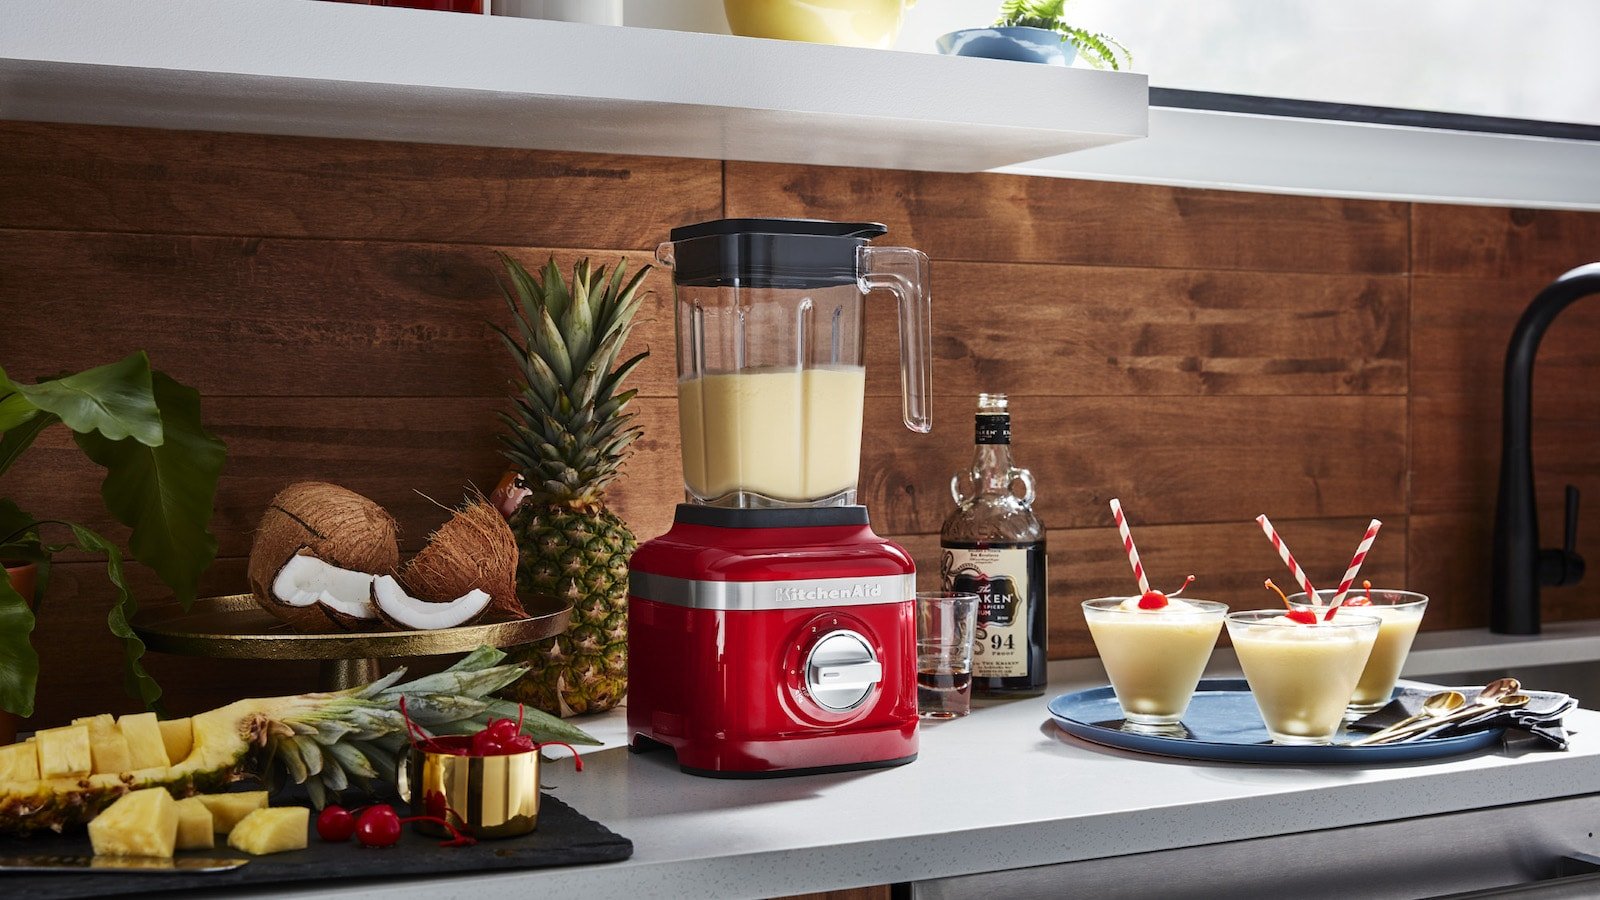 KitchenAid K150 3-speed ice crushing blender blends up your ice in fewer than 10 seconds